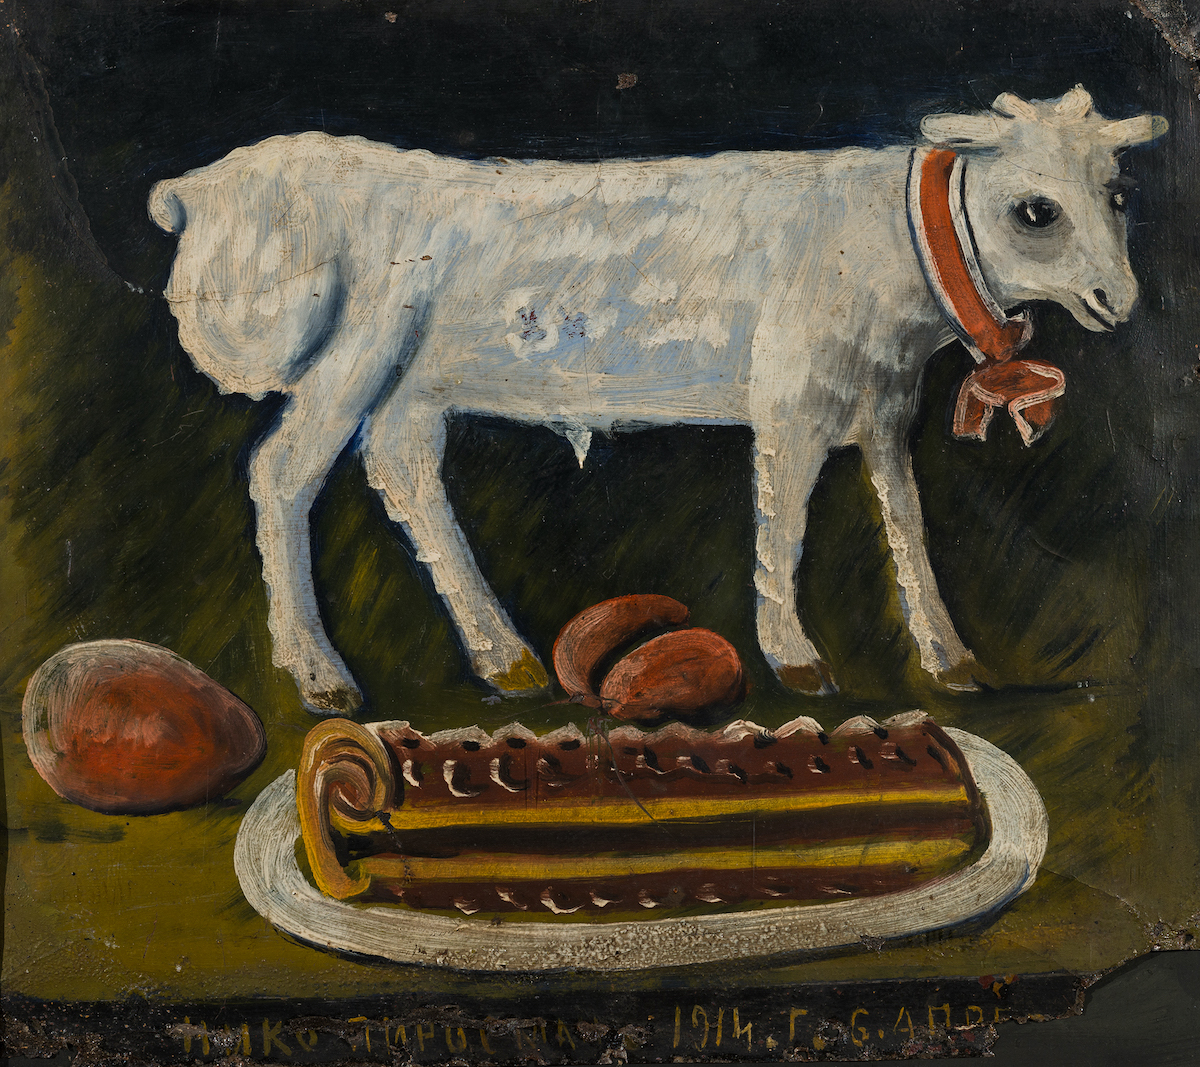 Niko Pirosmani, Easter Lamb, 1914. Oil on tin plate. Collection of Valery Dudakov. Currently in the collection of Iveta and Tamaz Manasherov.